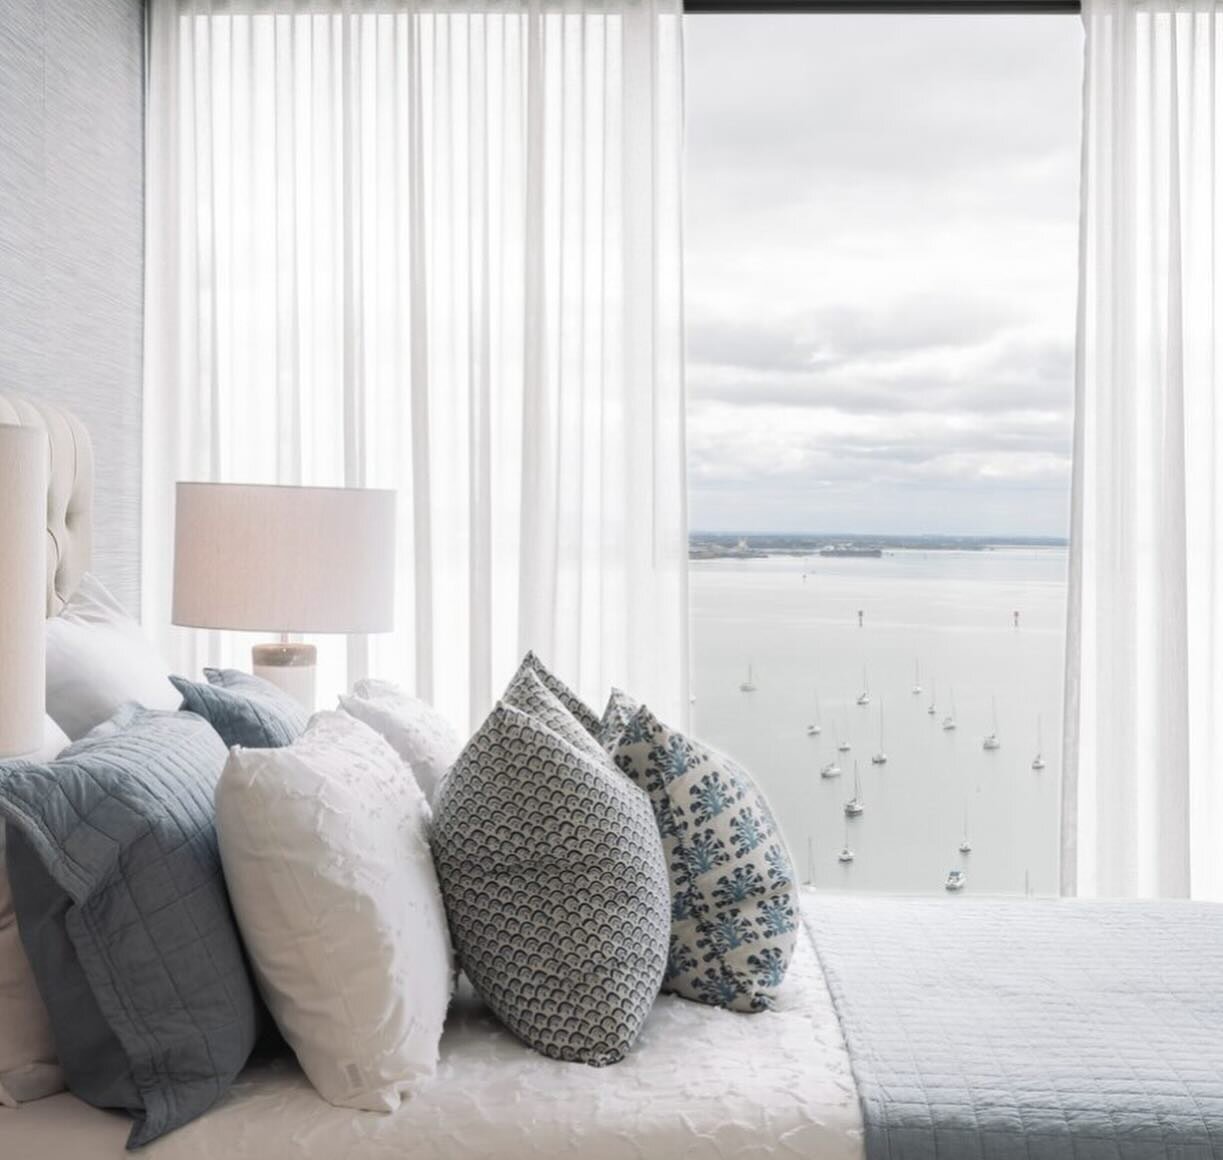 Now that&rsquo;s a view! Imagine waking up to Corio Bay in panorama every day!

We were delighted to assist @premiuminteriordesignau with custom window treatments for this project, managed by the wonderful @teamkath_braxwindowtreatments. 

Wave fold 